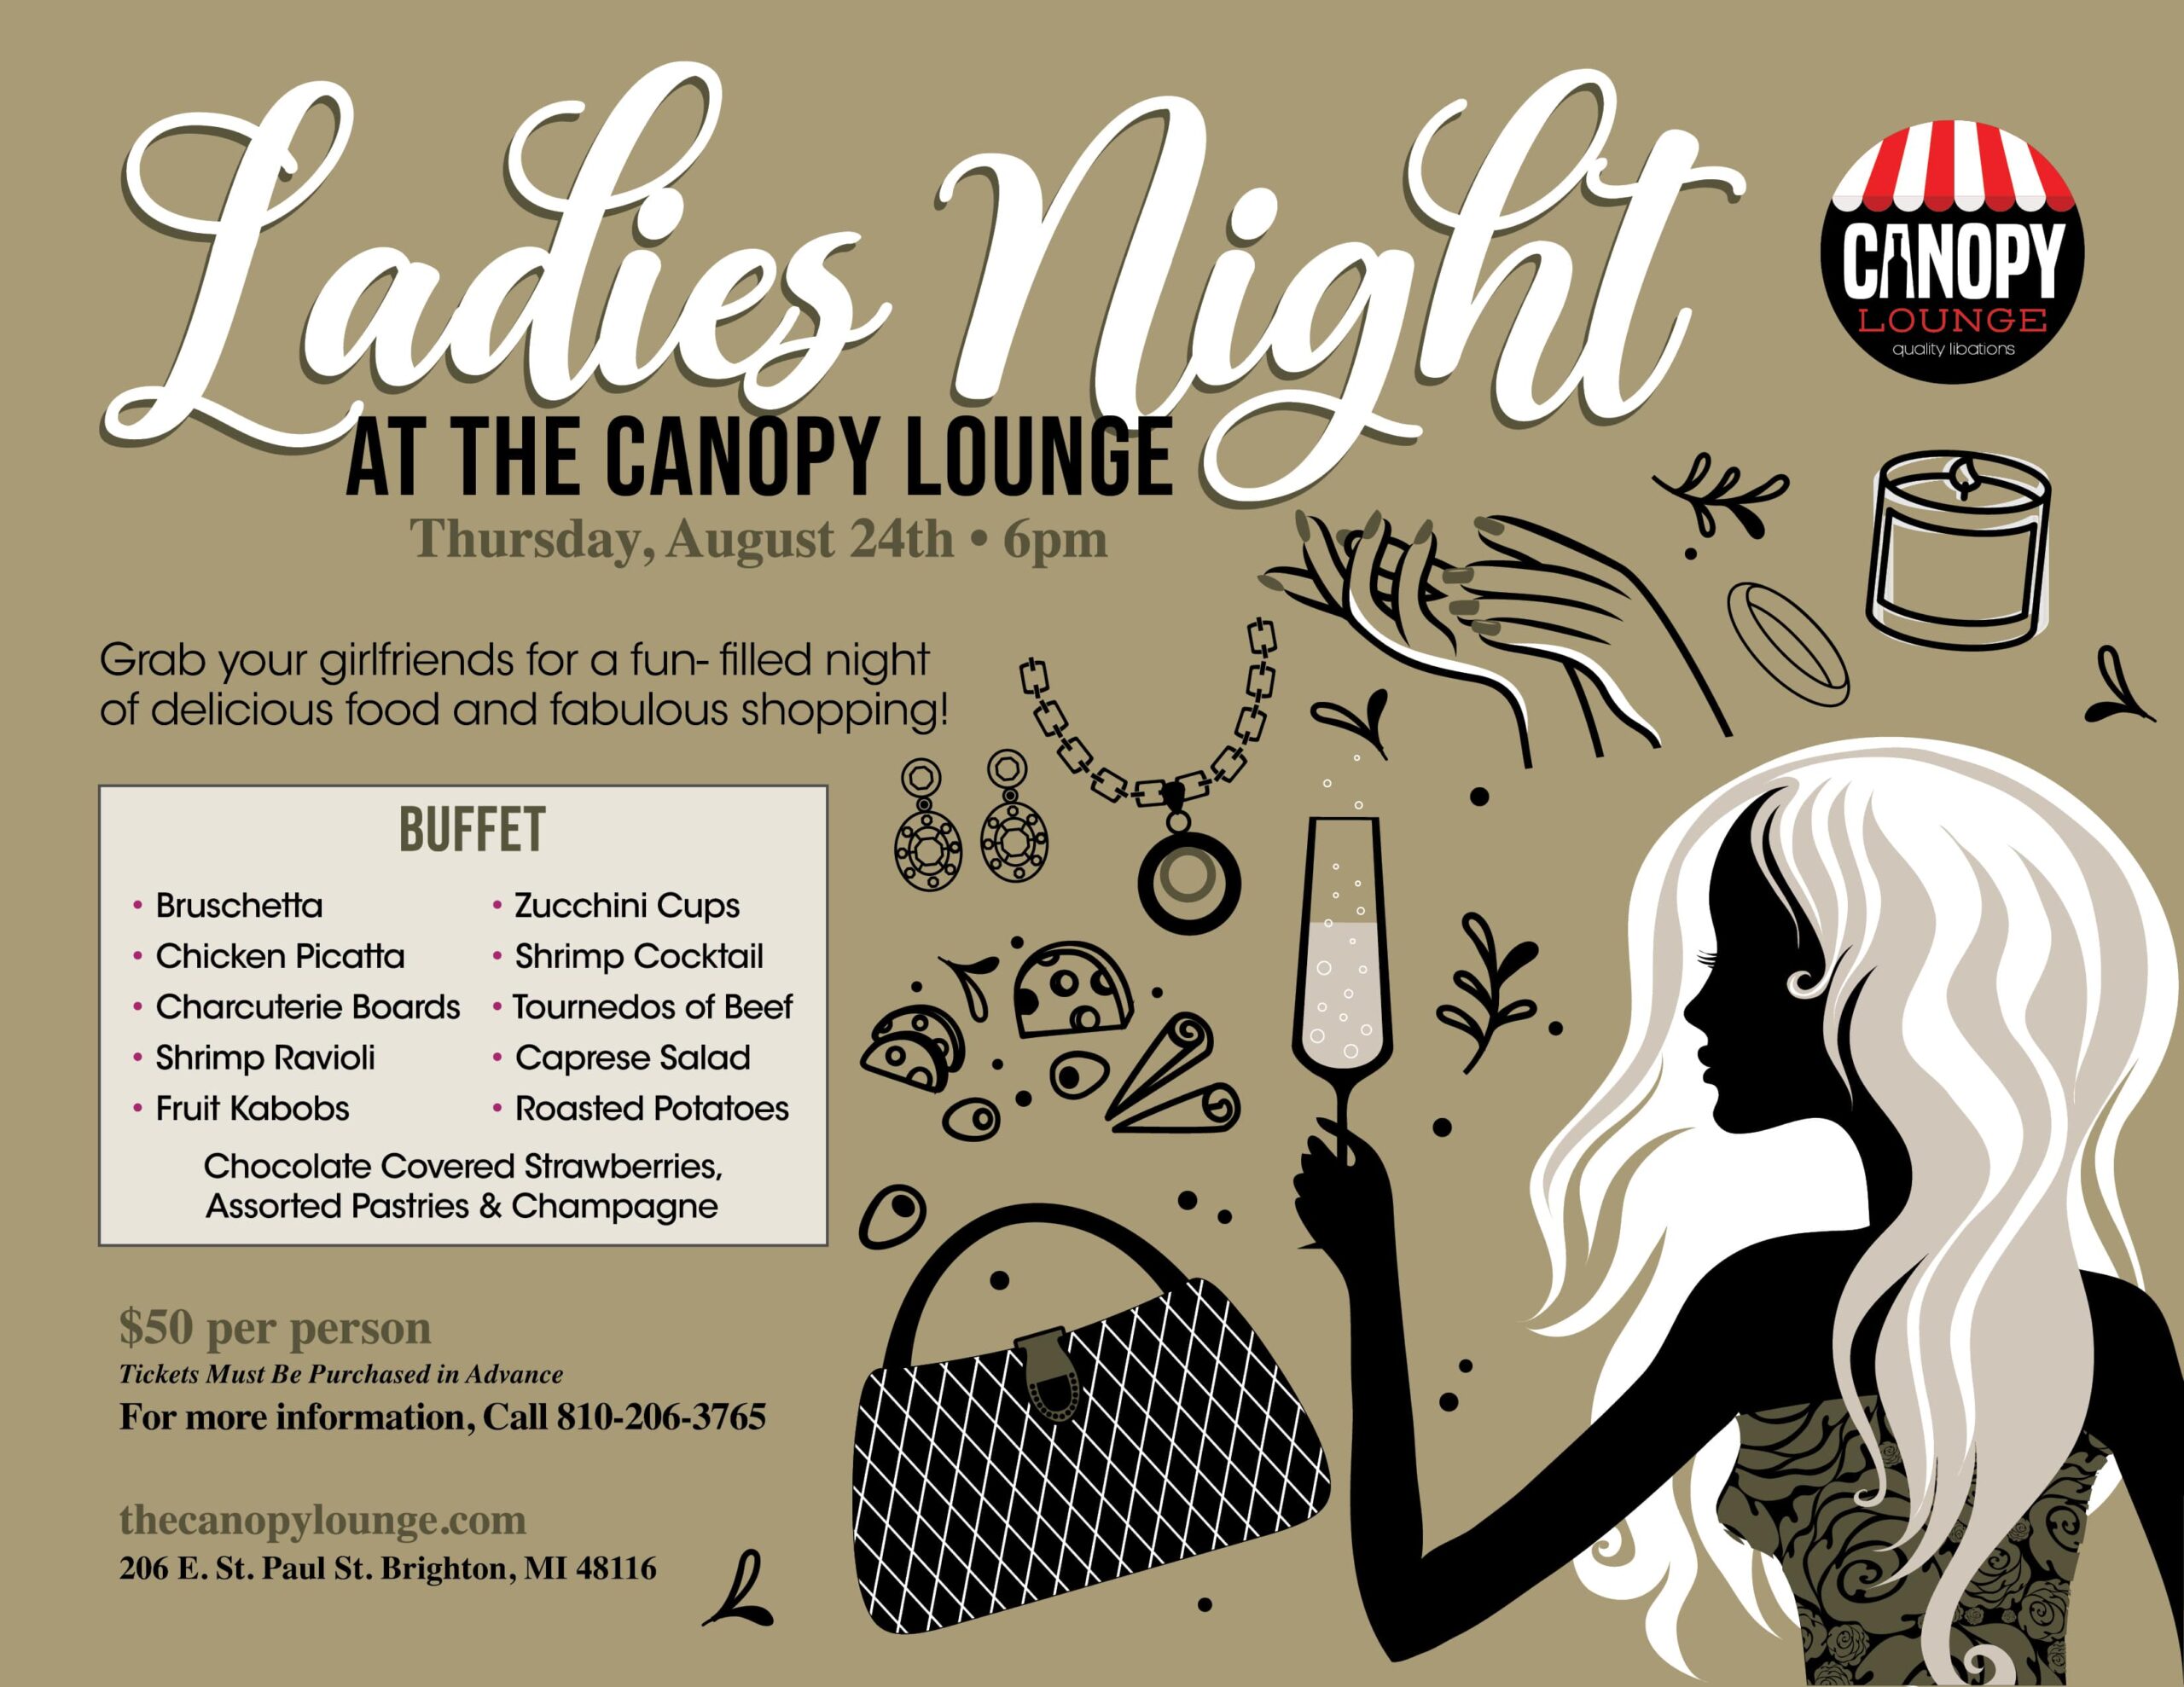 Ladies Night at the Canopy Lounge. Thursday, August 24th, 6pm